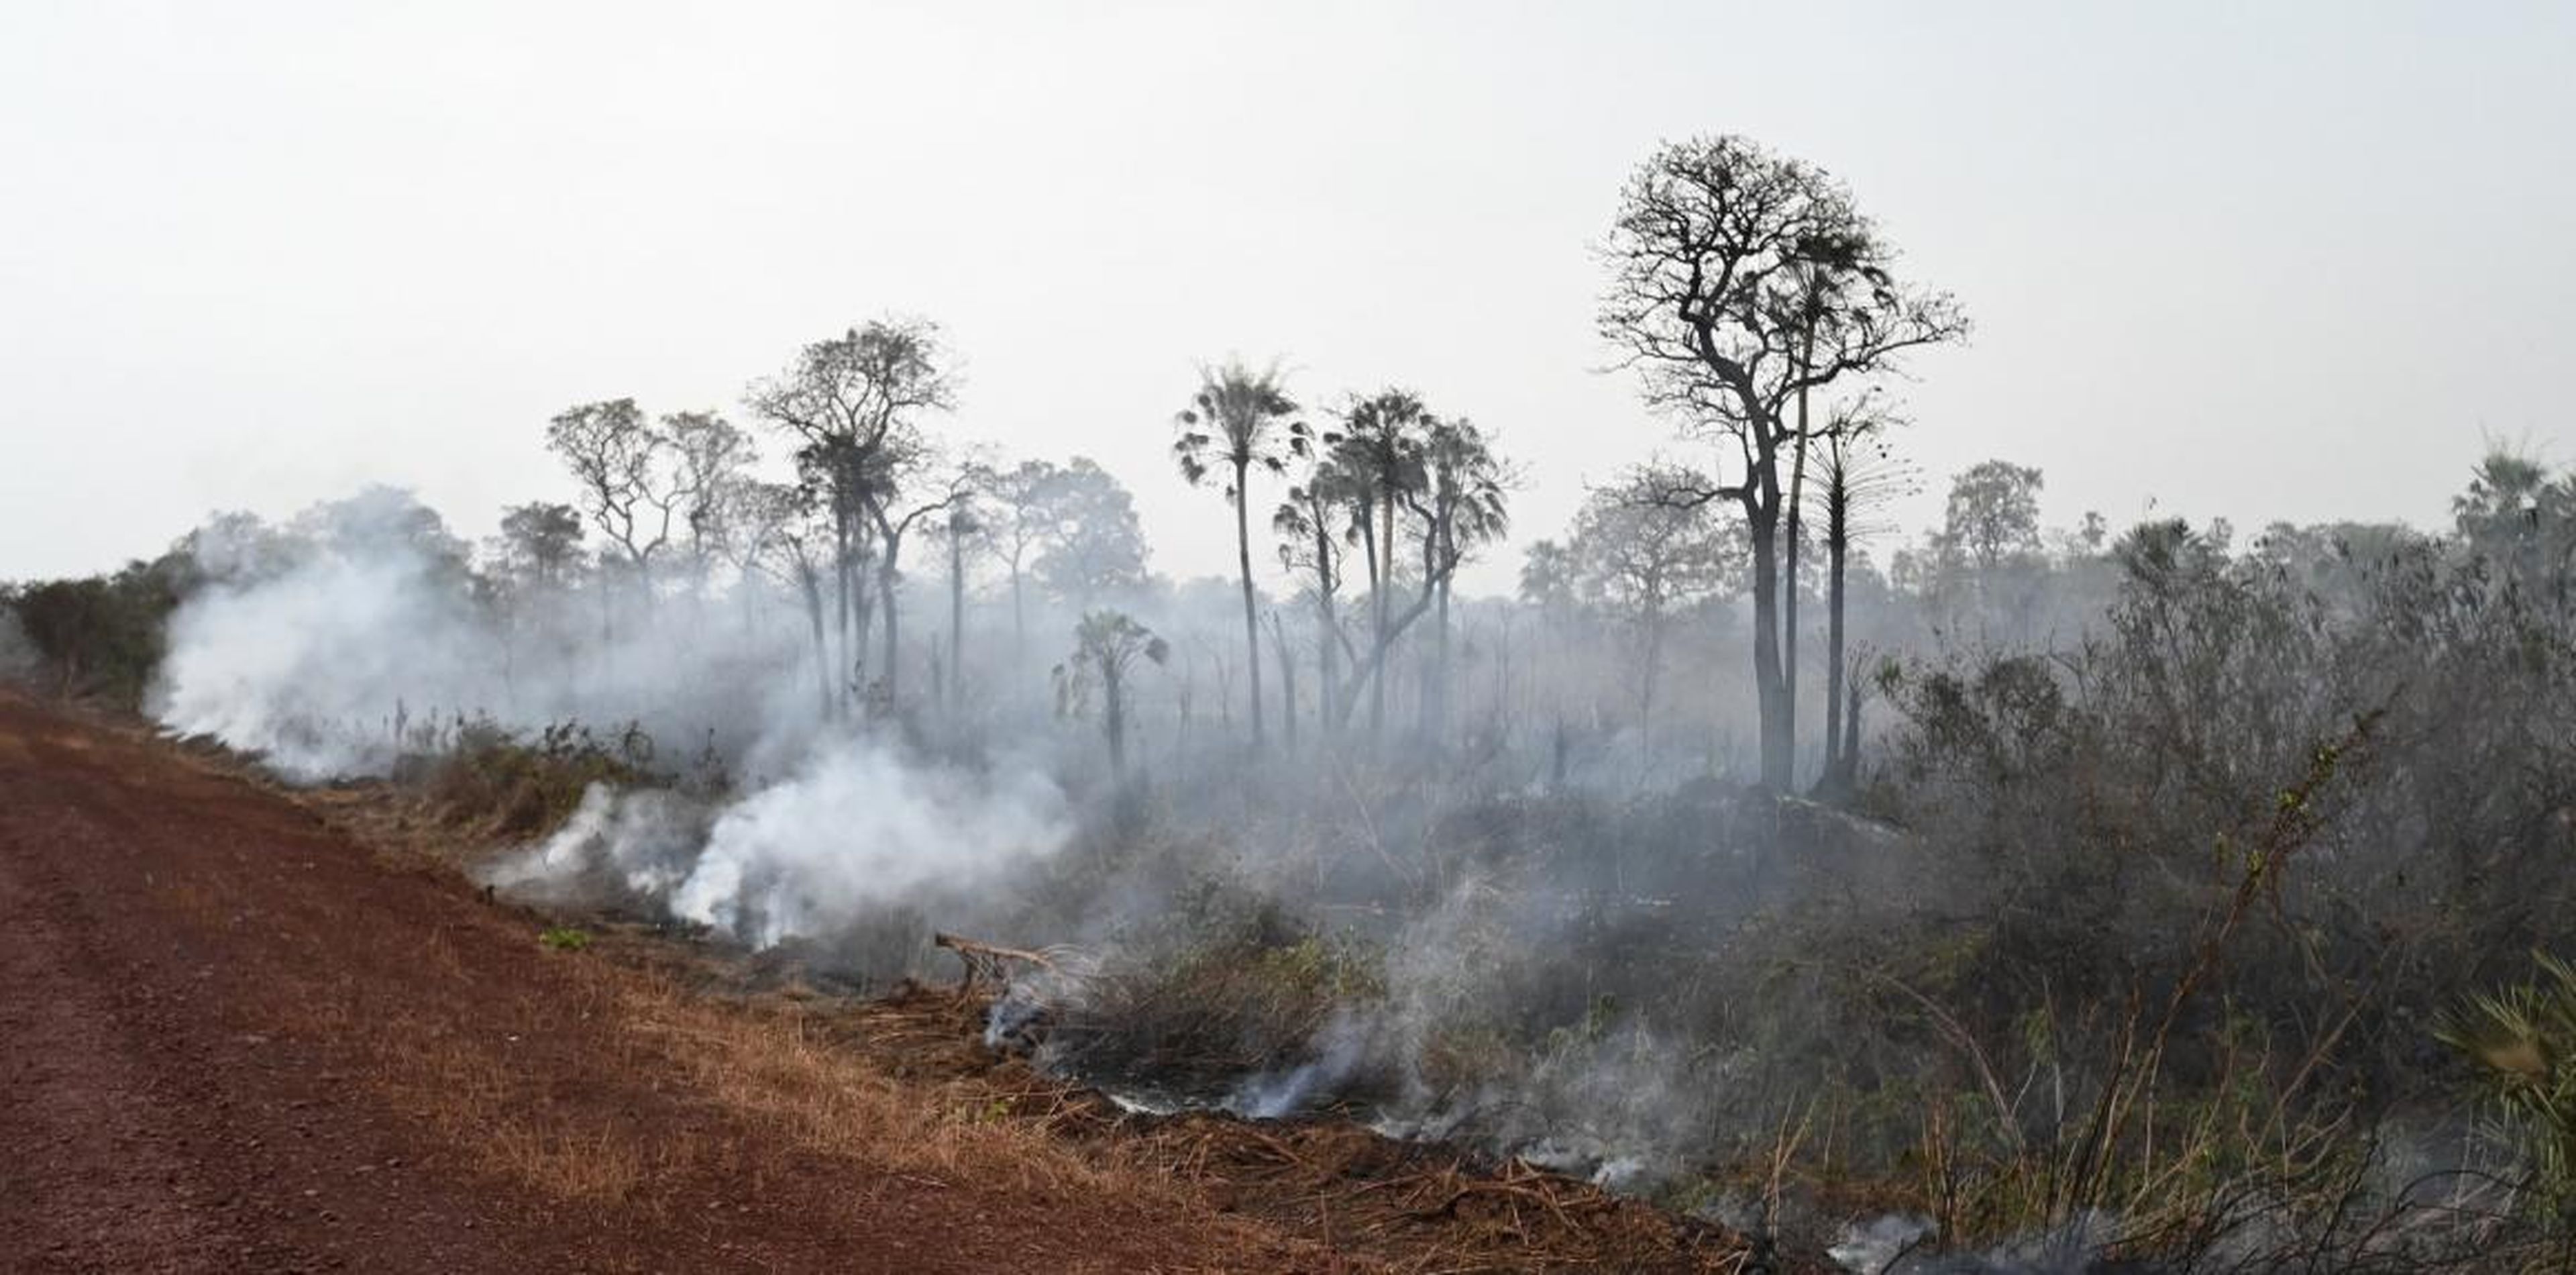 Sonia Guajajara, who coordinates the Articulation of Indigenous People of Brazil, told The Atlantic weakened governmental protections and new roads have contributed to the high number of fires because they broke the forest up and